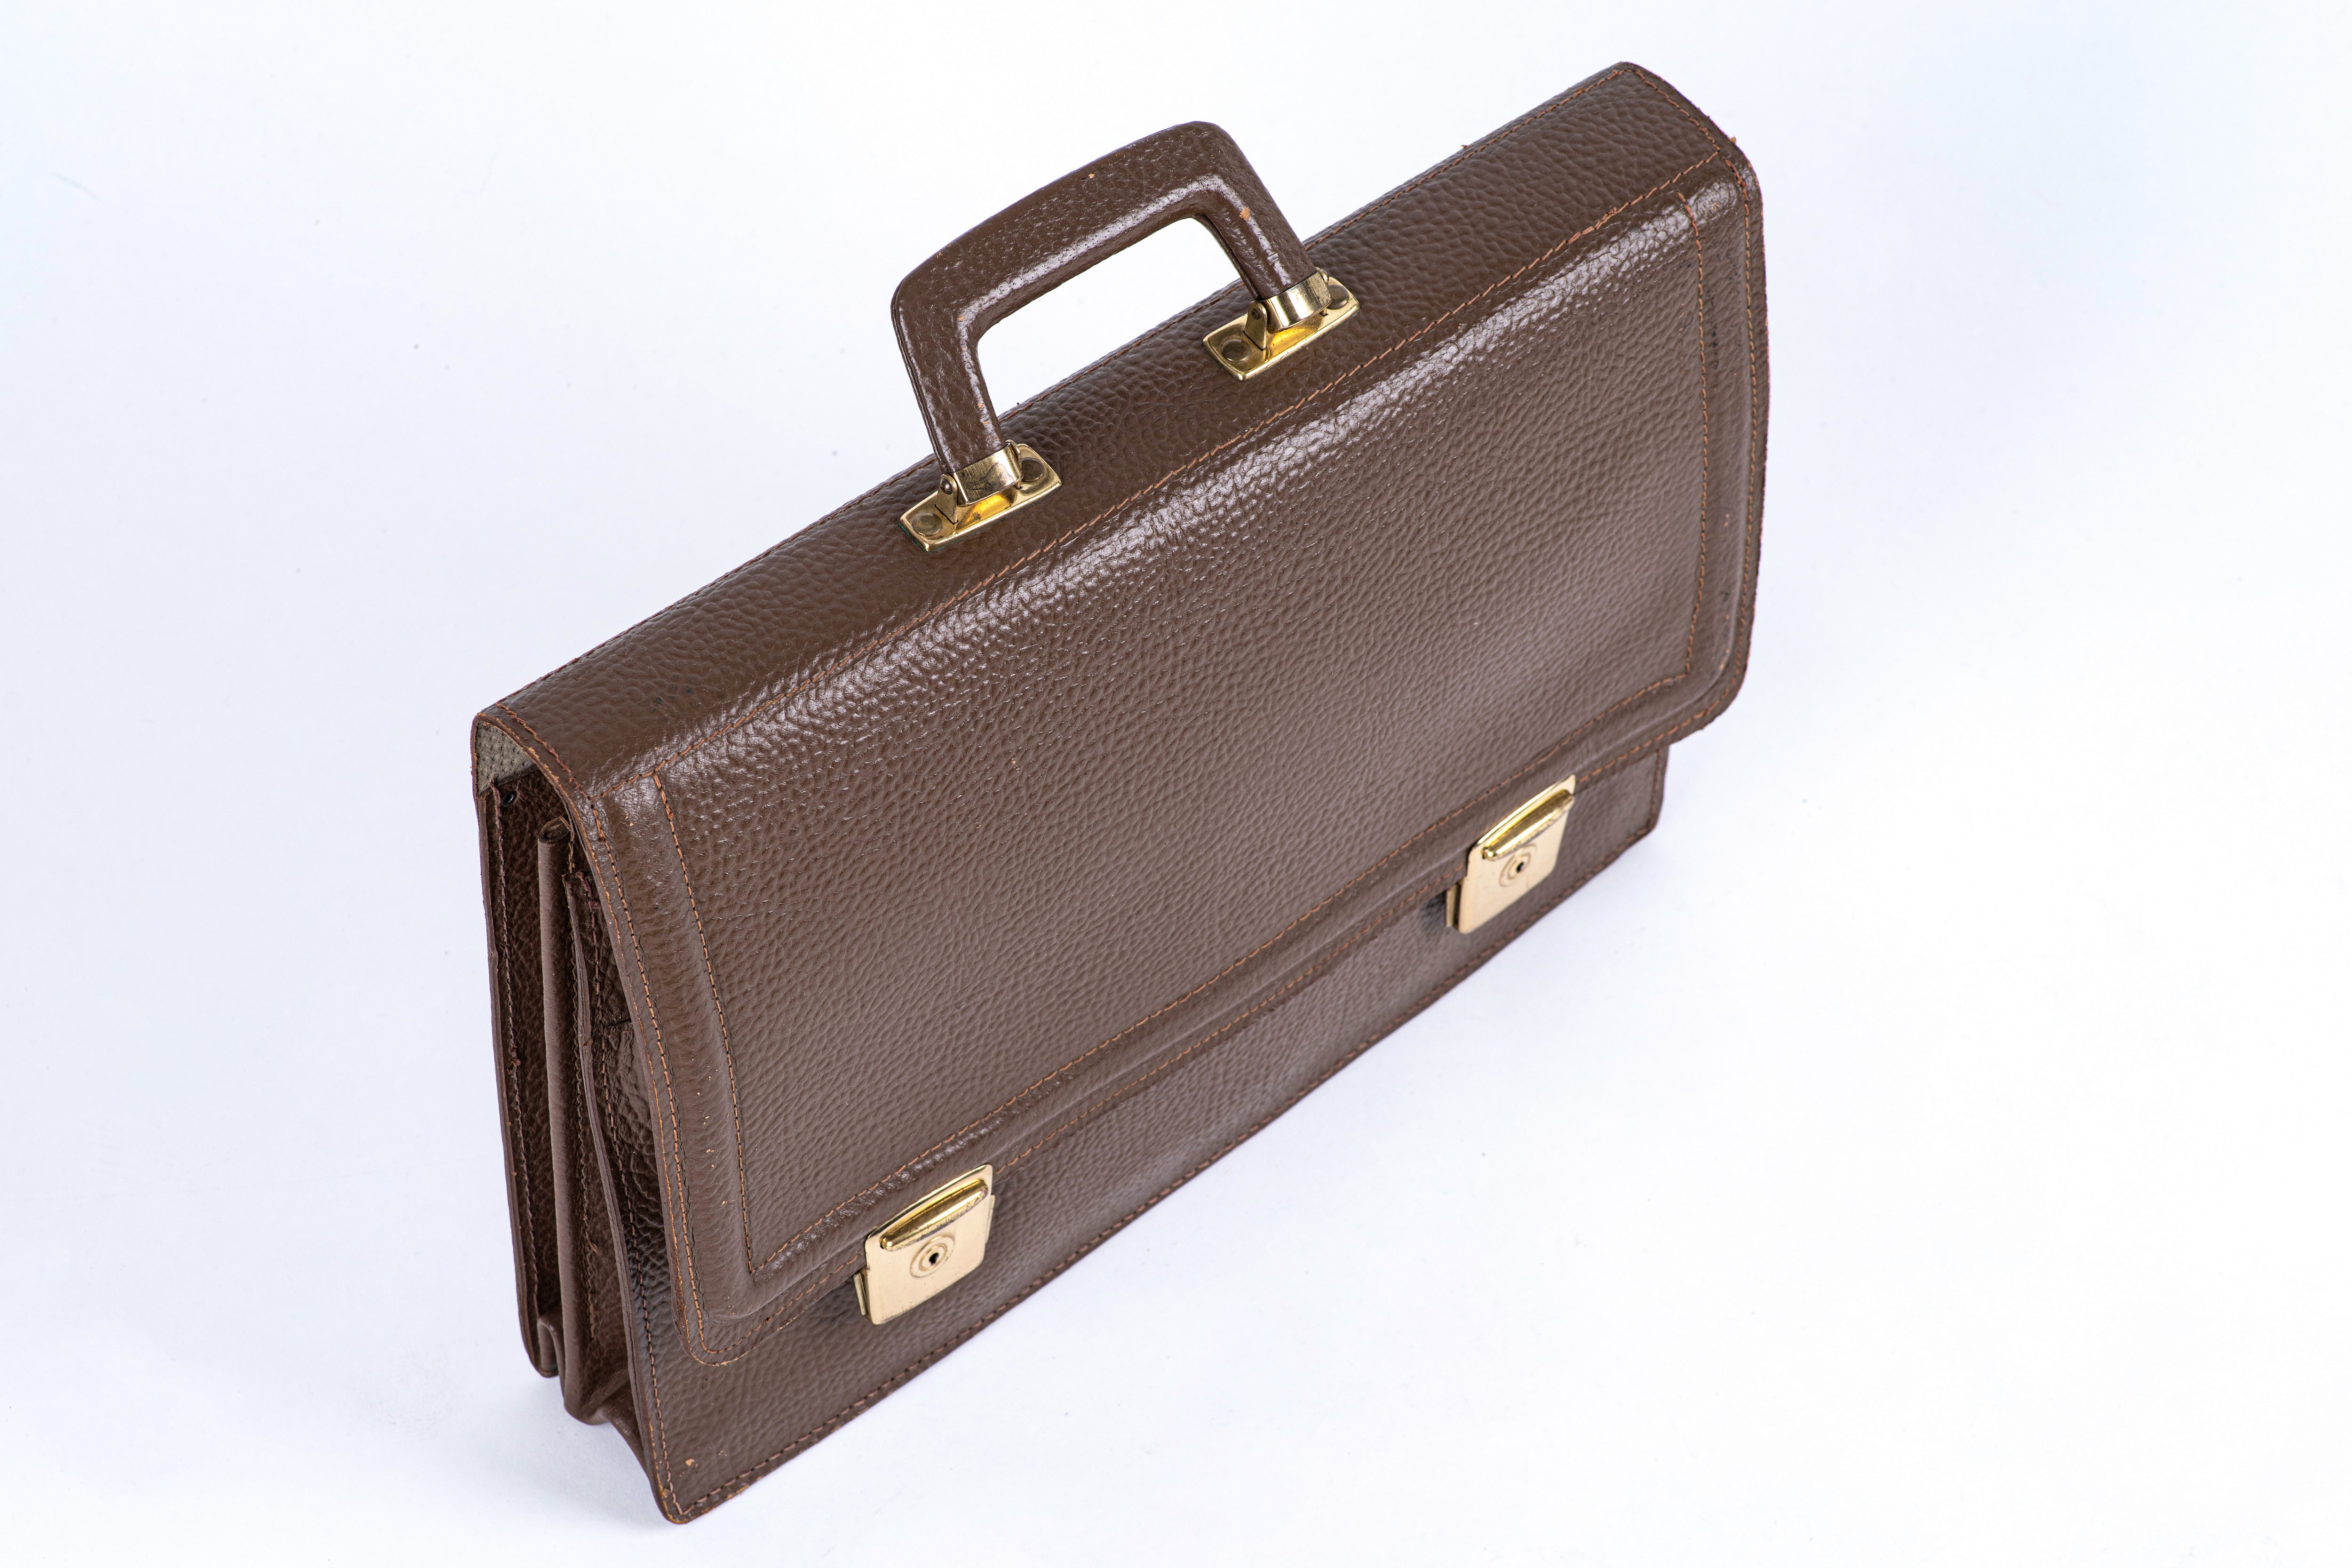 Vintage Men's Iconic Taupe Brown Leather Briefcase